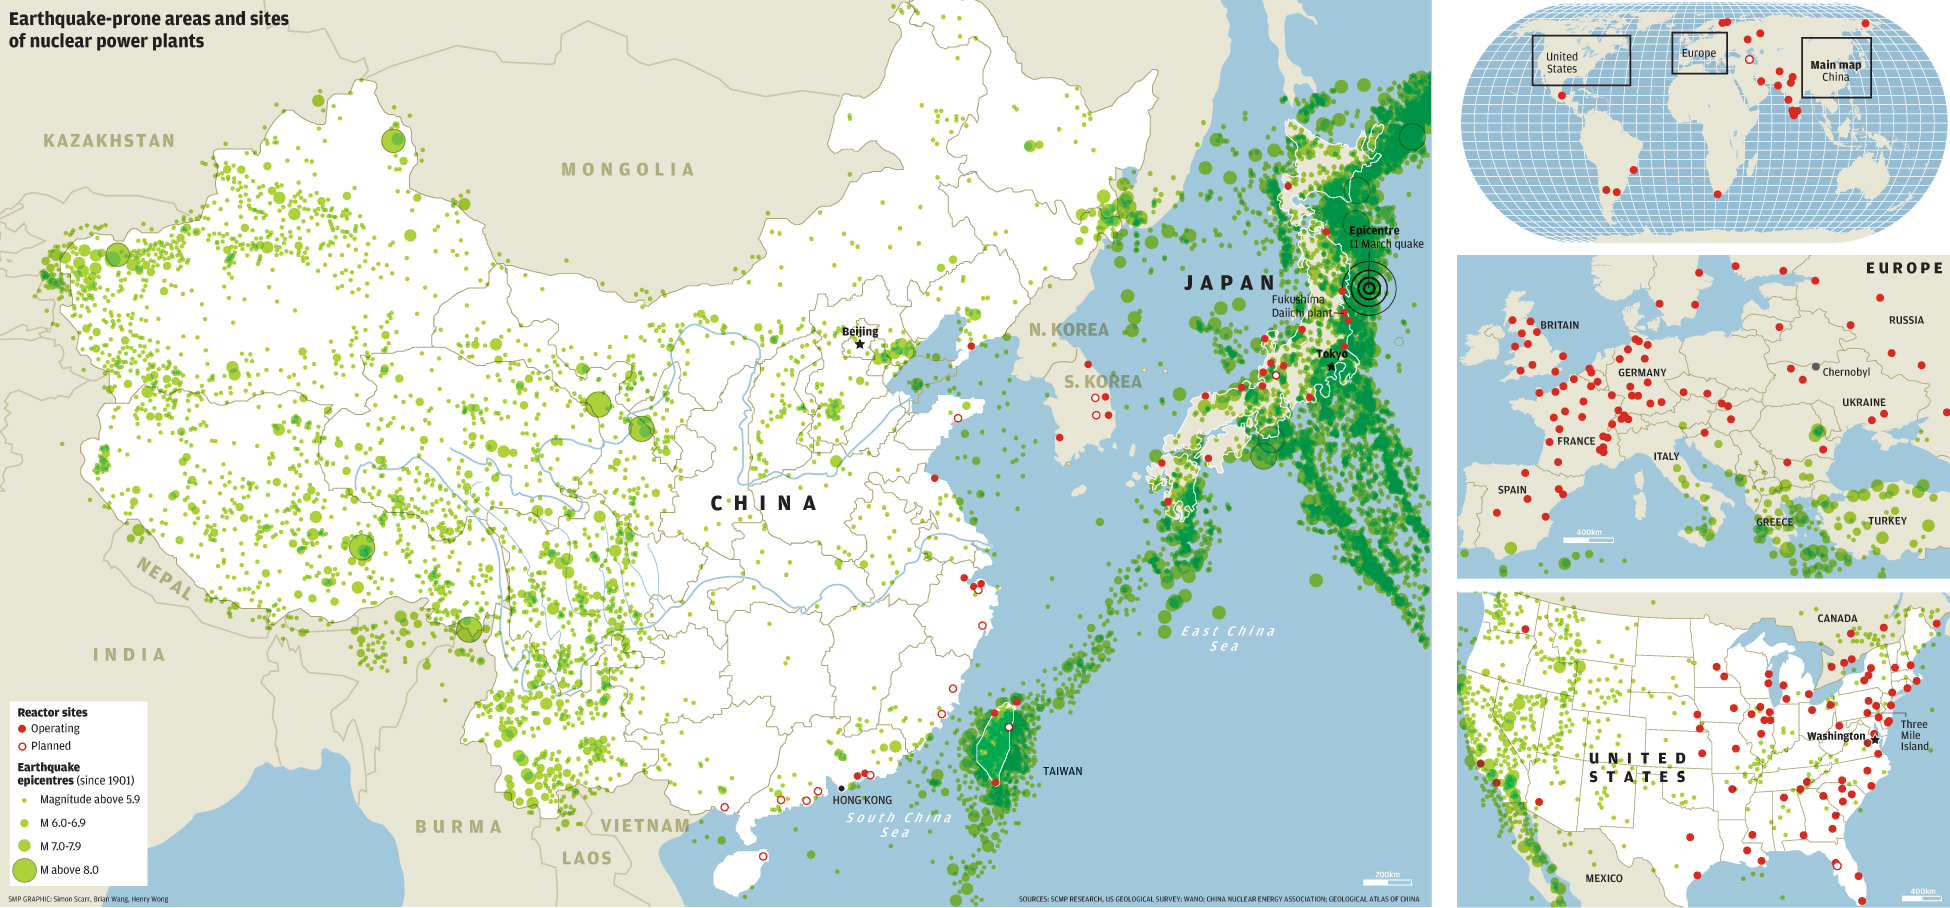 Earthquake-prone areas and sites of nuclear power plants